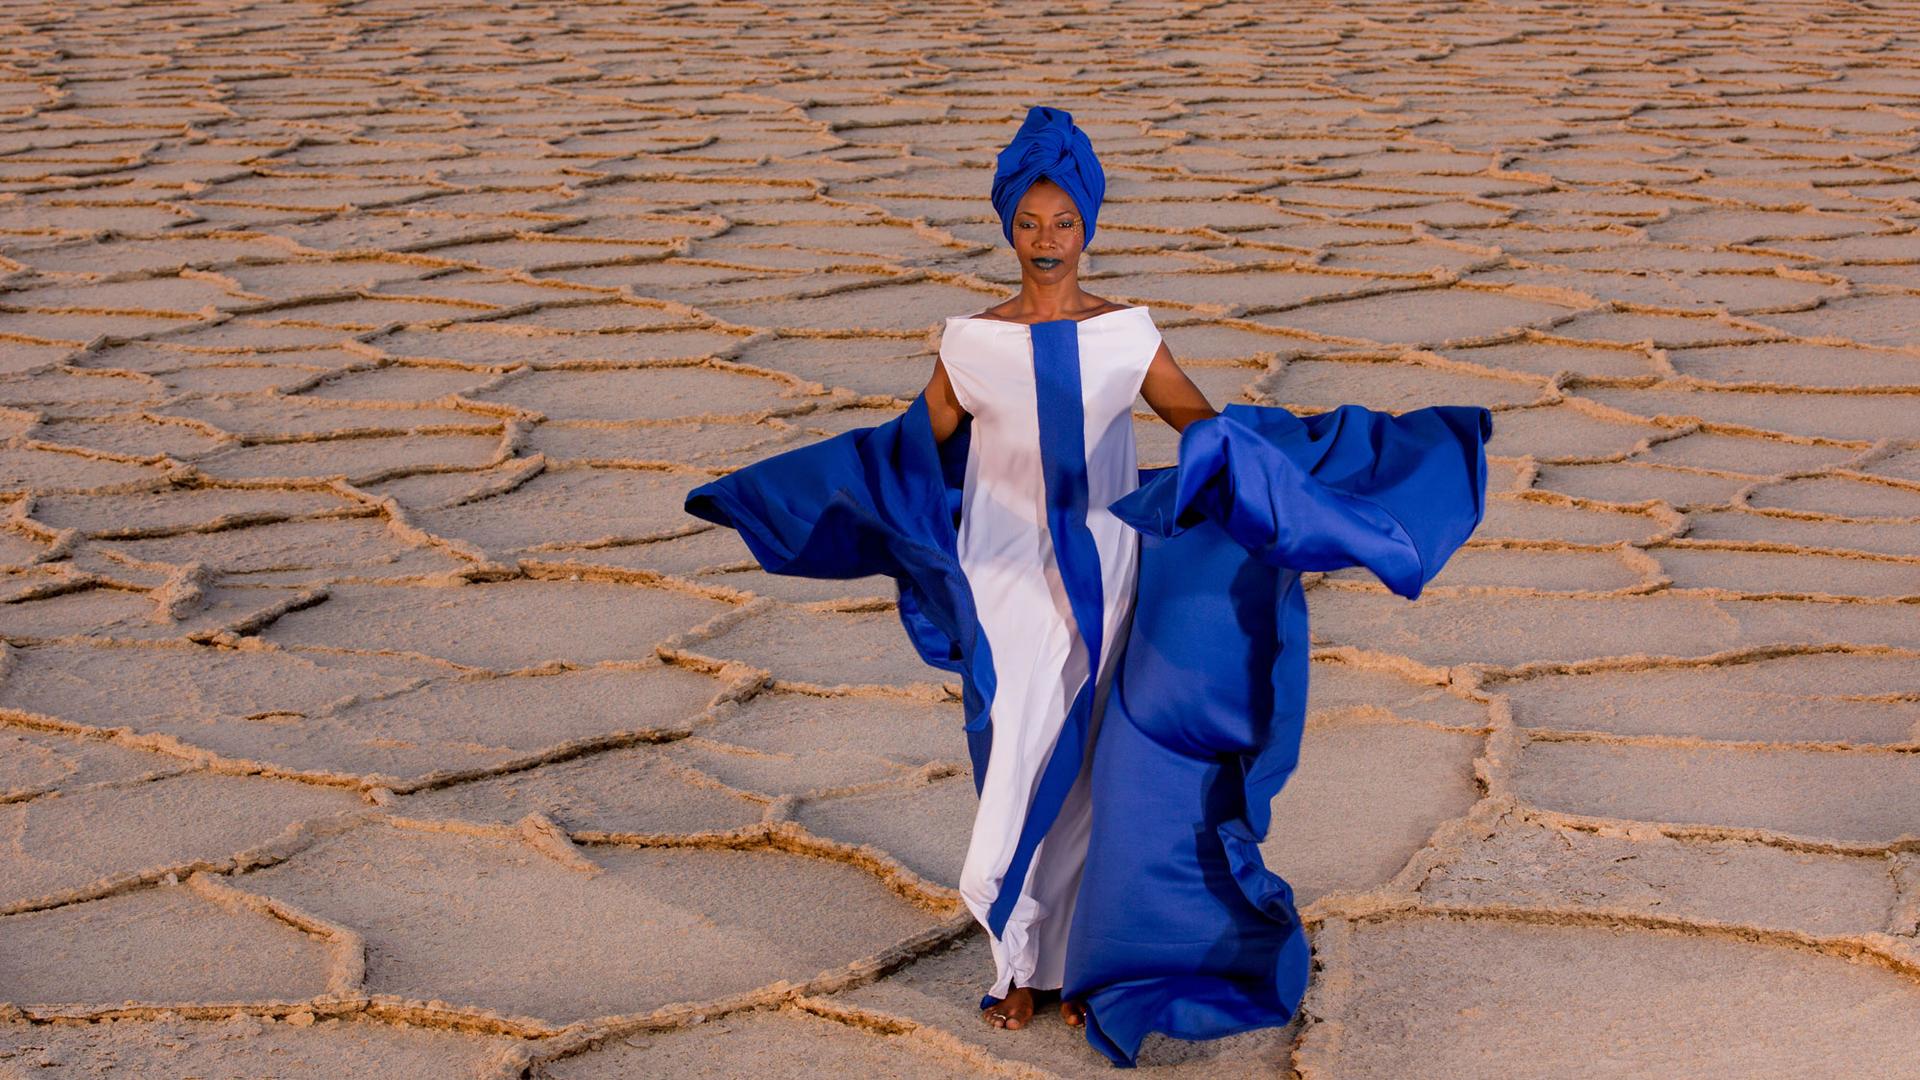 Malian singer Fatoumata Diawara is shown in a bright blue and white dress standing in the desert. 